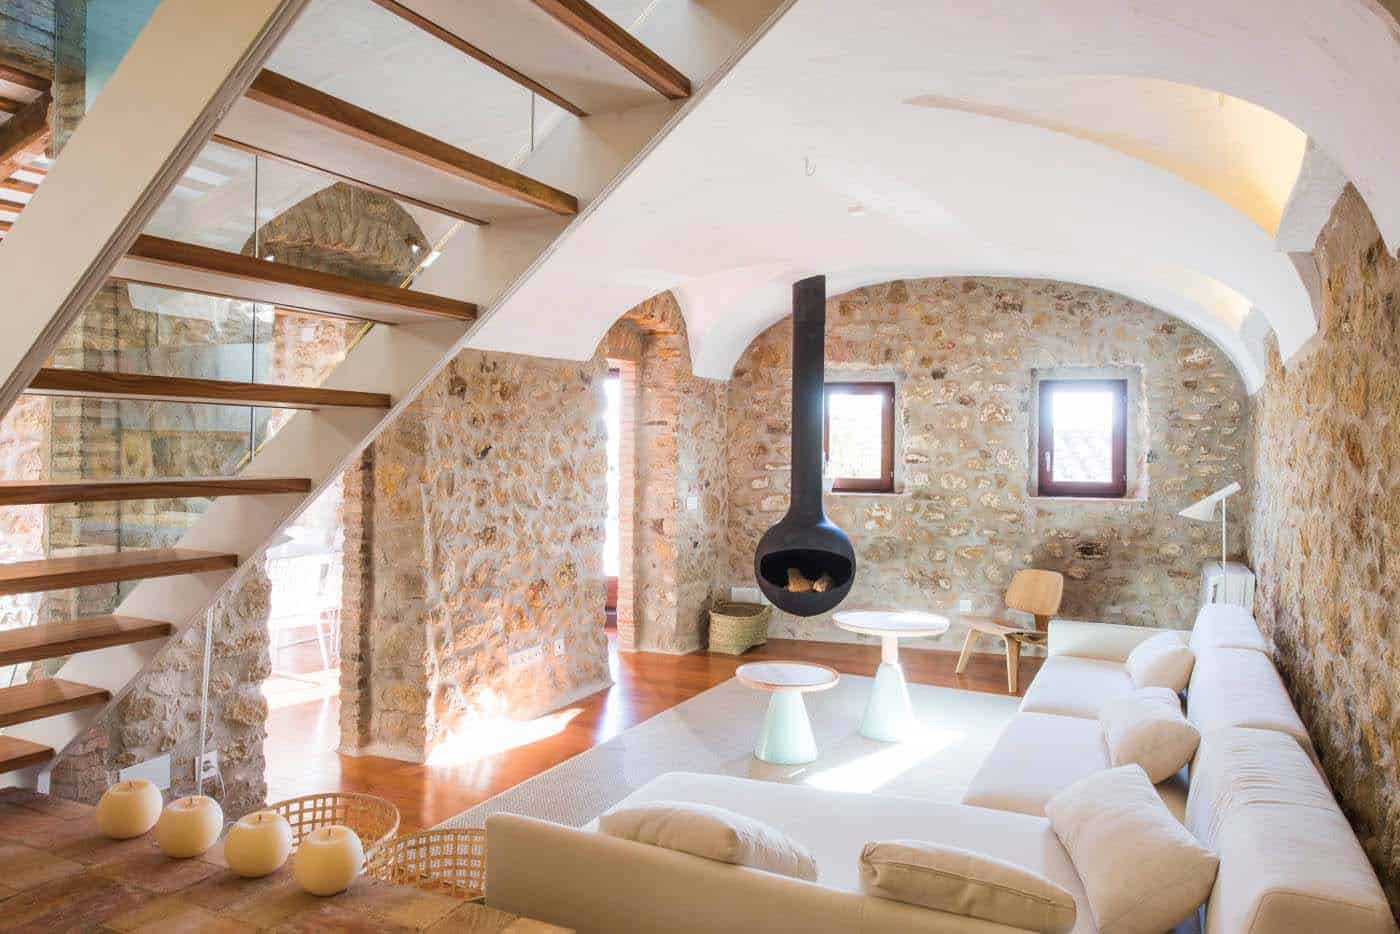 Historic stone dwelling in Spain gets stunning transformation